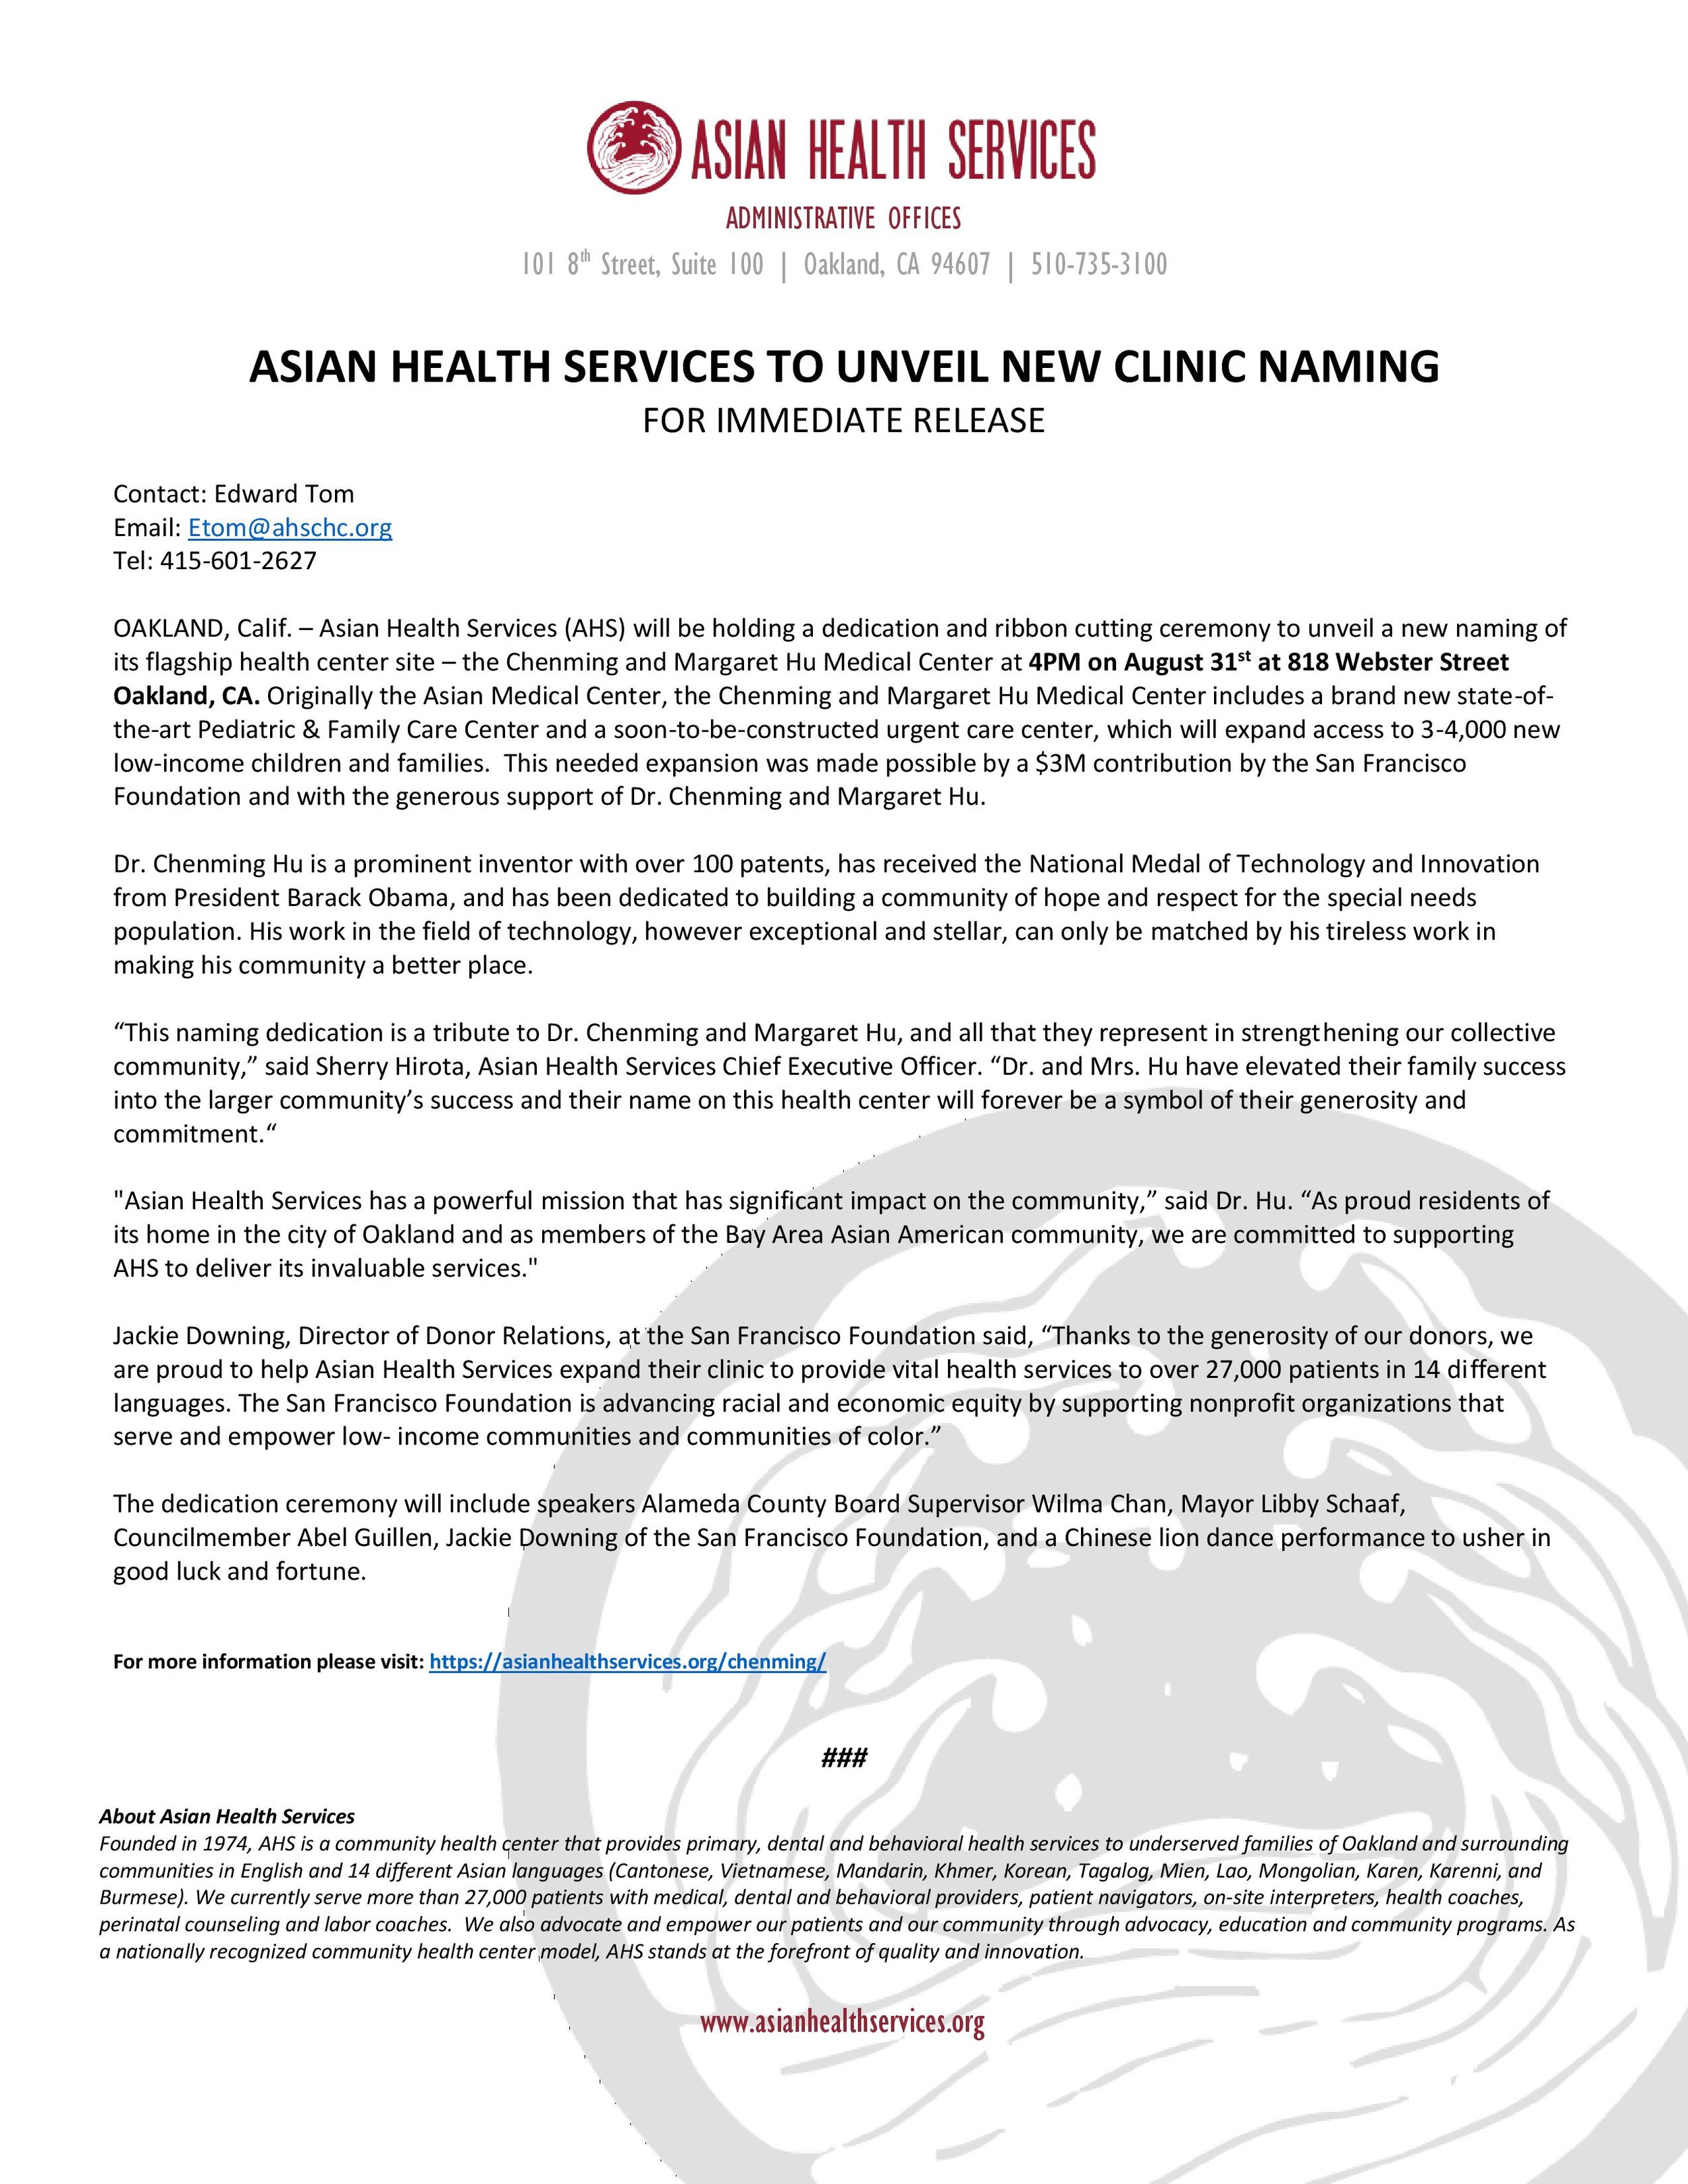 AHS Chenming Press Release FINAL-page-001.jpg